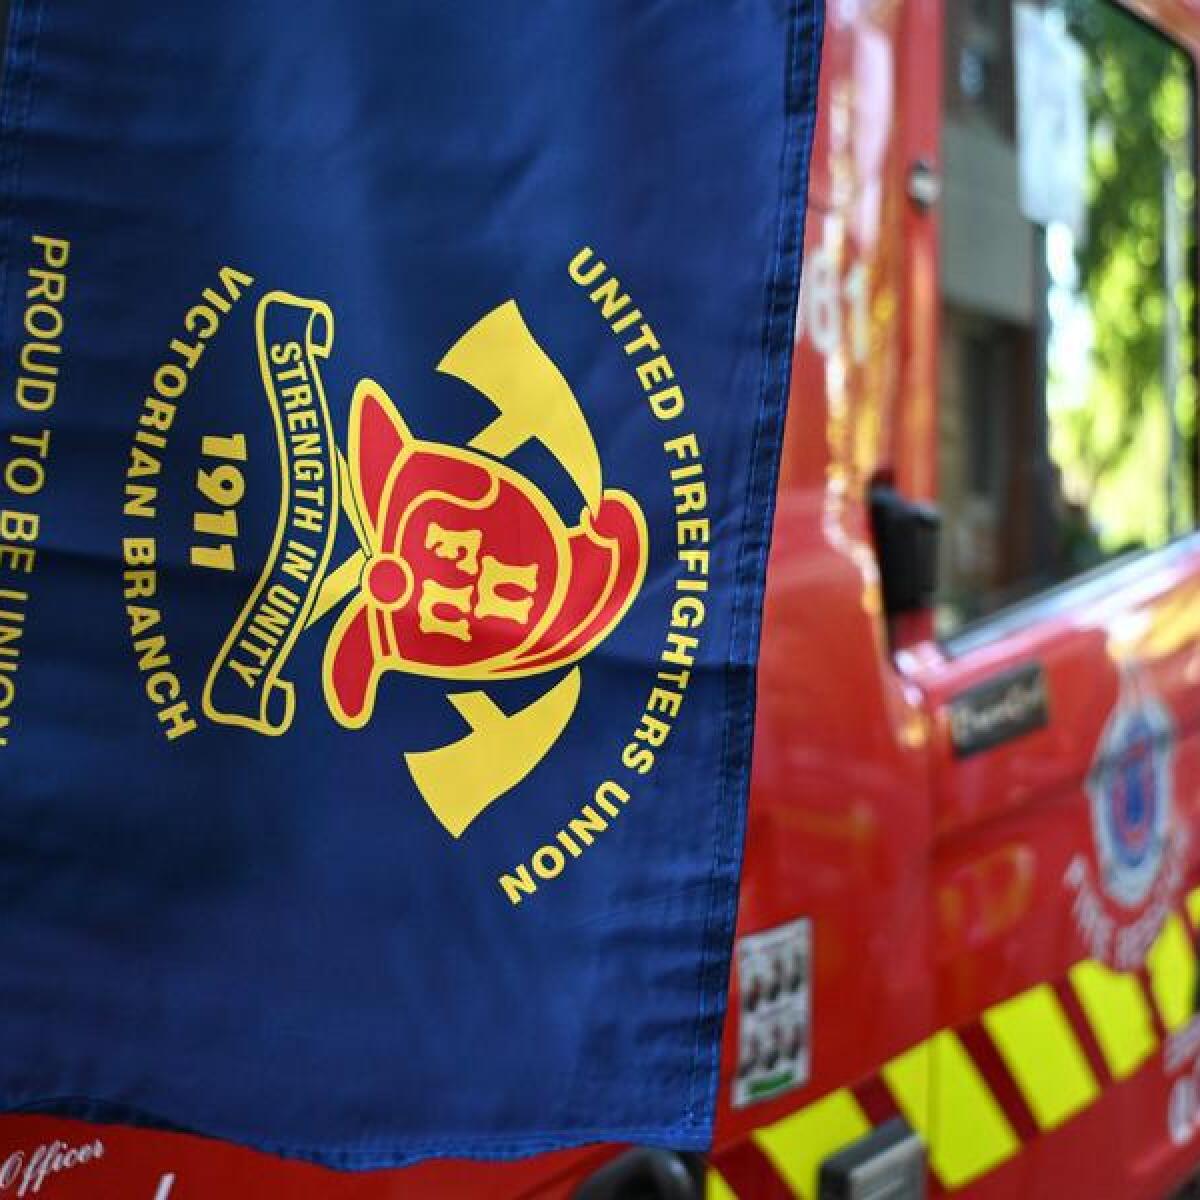 United Firefighters Union flag (file image)